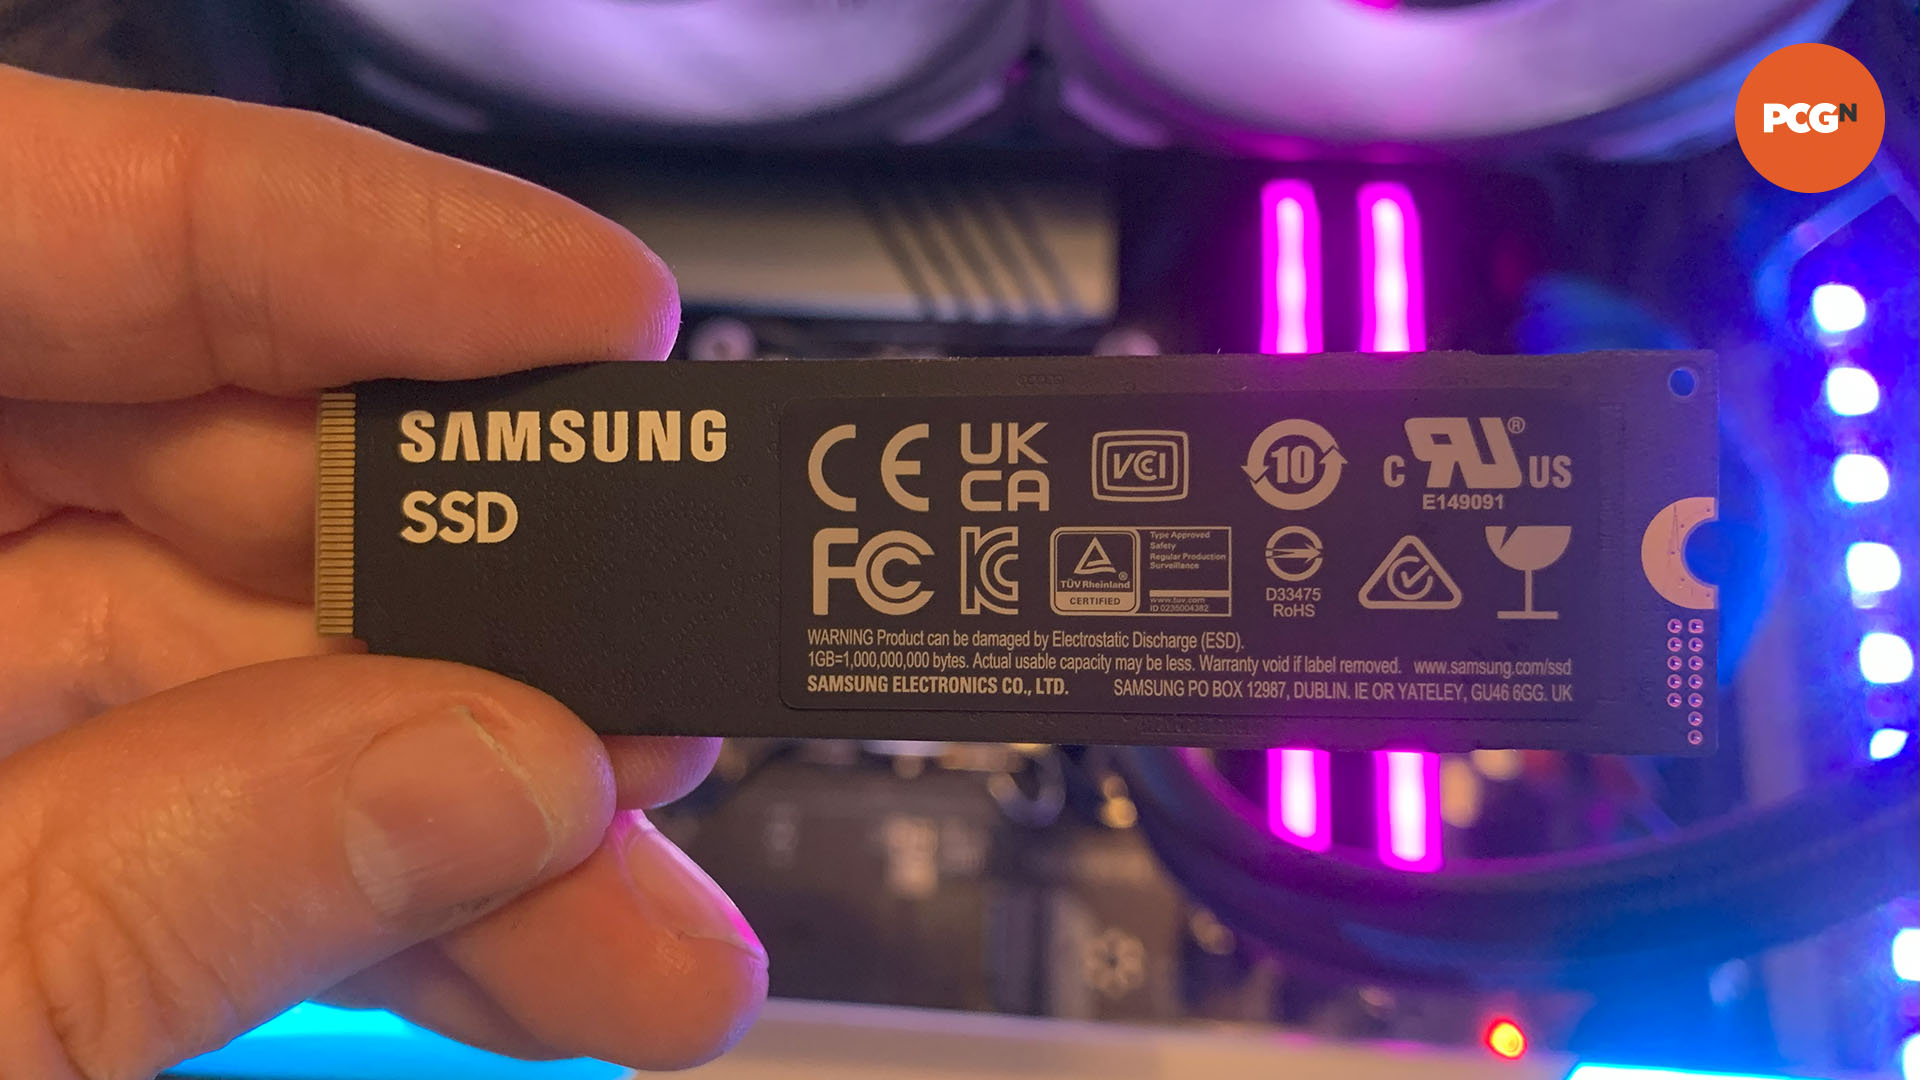 Samsung 980 Pro review: Underside of SSD